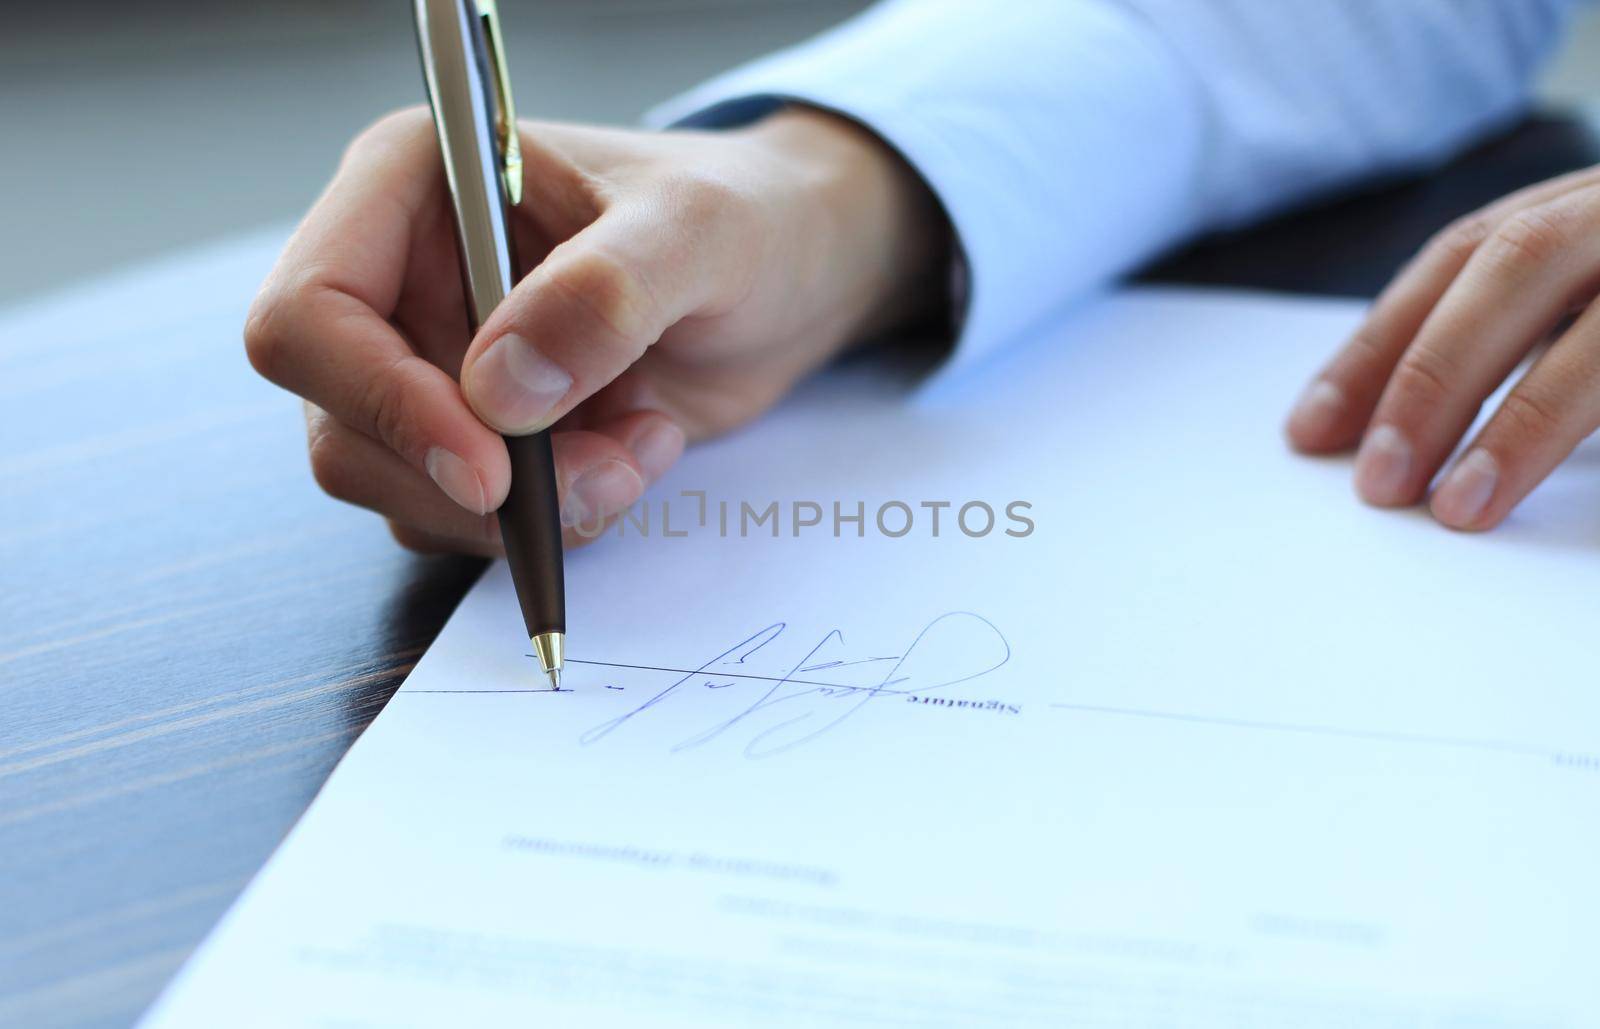 Businesswoman sitting at office desk signing a contract with shallow focus on signature.